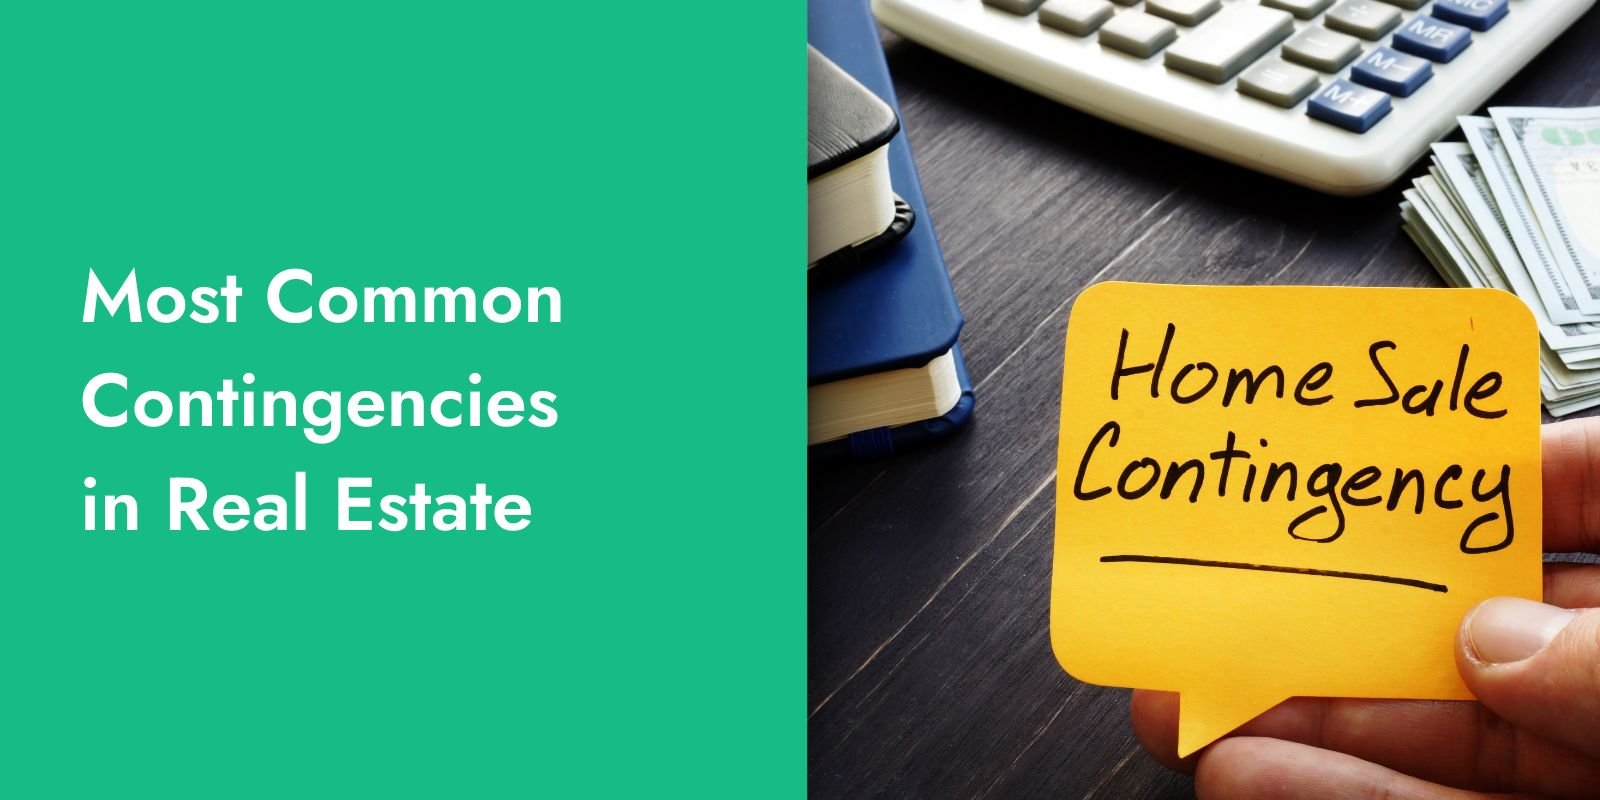 Most Common Contingencies in Real Estate